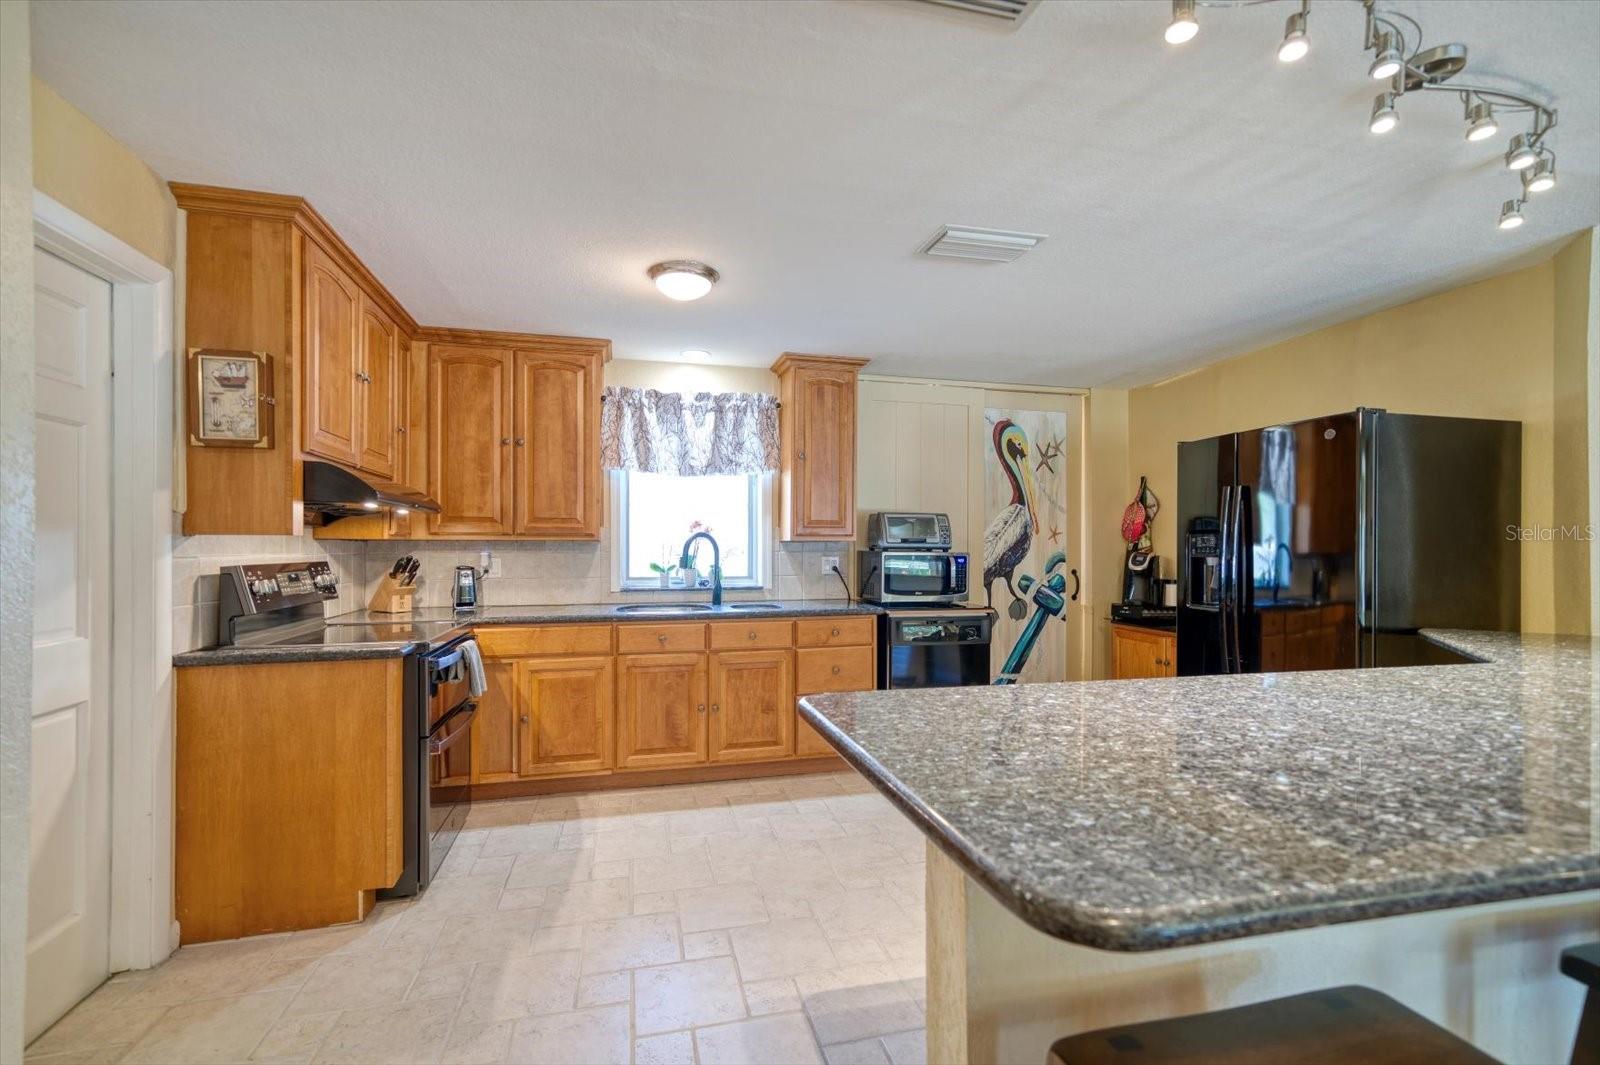 Spacious in size the kitchen has a nice flow with newer appliances and large pantry.